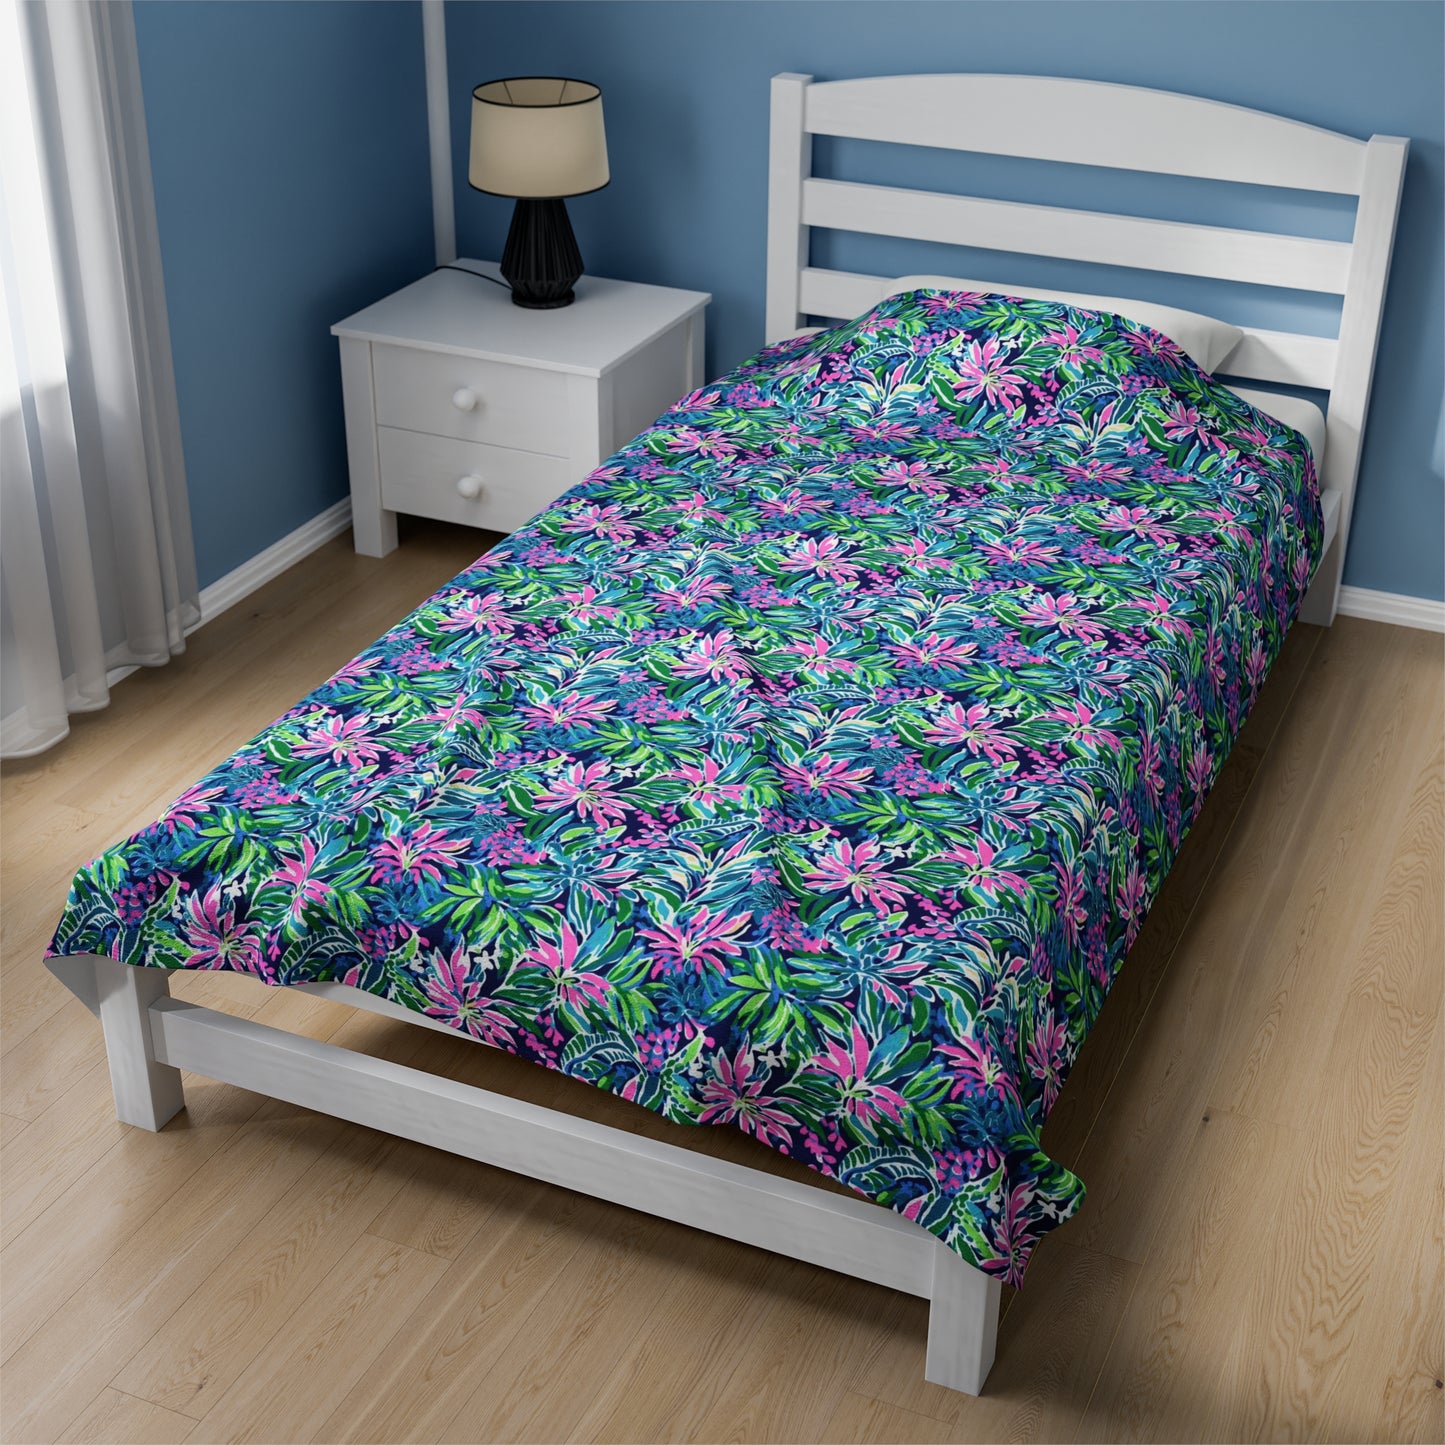 Seaside Blossoms: Coastal Spring Flowers in Pink, Green, and Navy Watercolors Velveteen Plush Blanket 3 Sizes